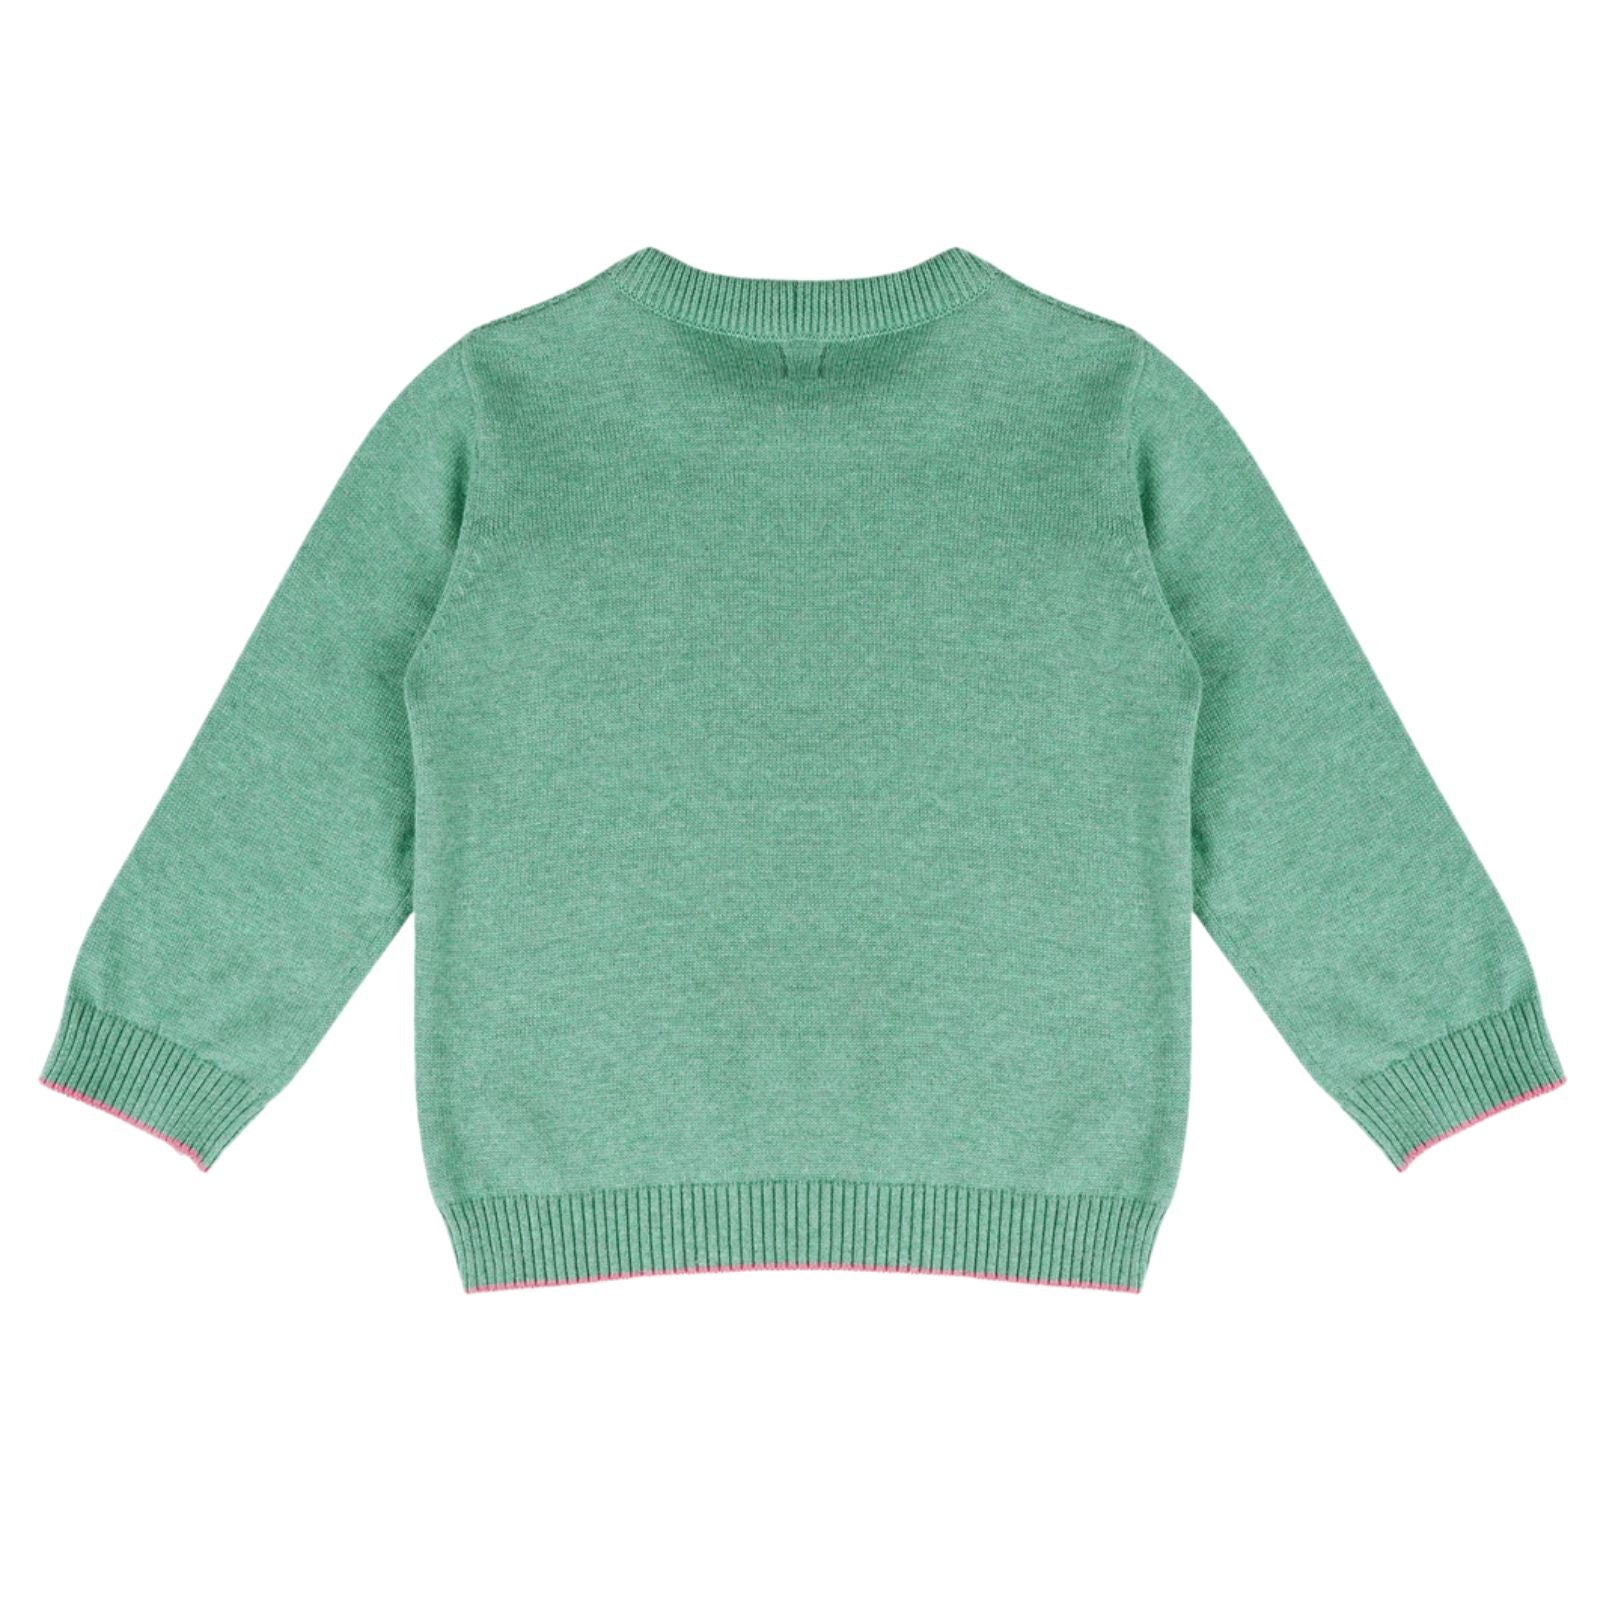 Lovable Baby Elephant Sea Weed Sweater - Blue 